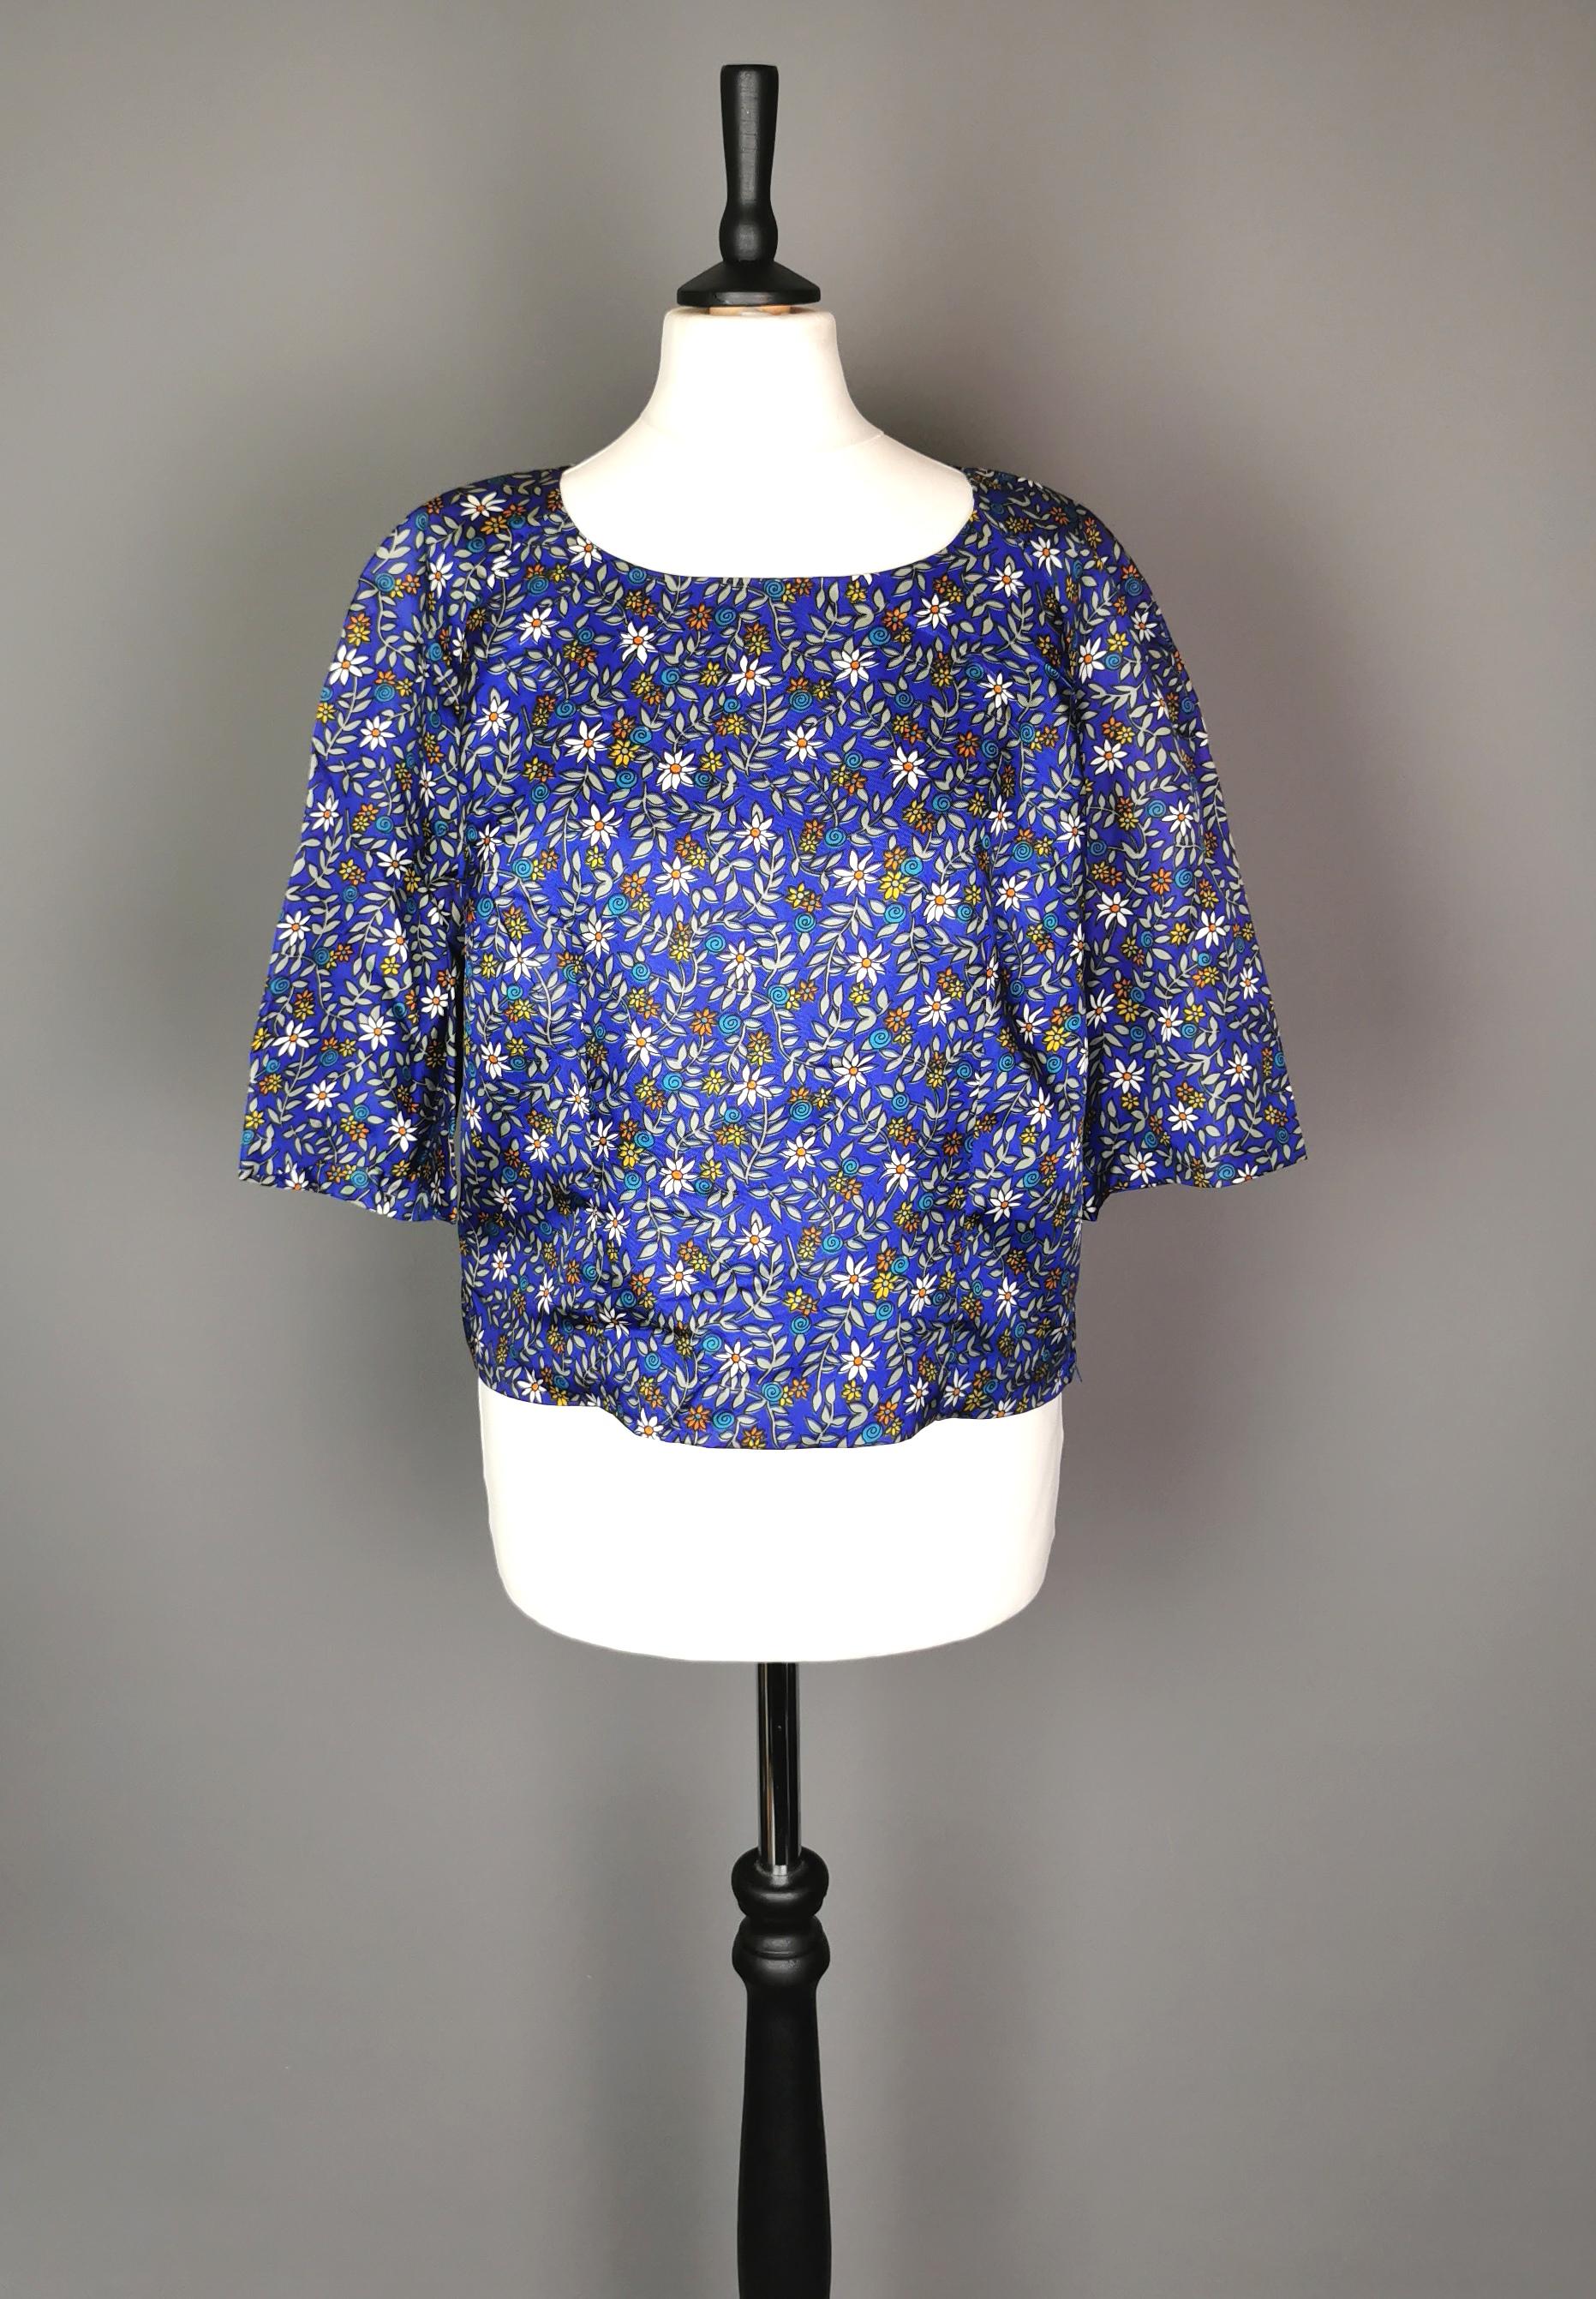 A gorgeous vintage c1960s flower power blouse.

It is a short length, slightly cropped style with short sleeves and a round crew neckline.

The blouse has a dark cobalt blue ground with an all over floral print.

It is bold and happy in style,